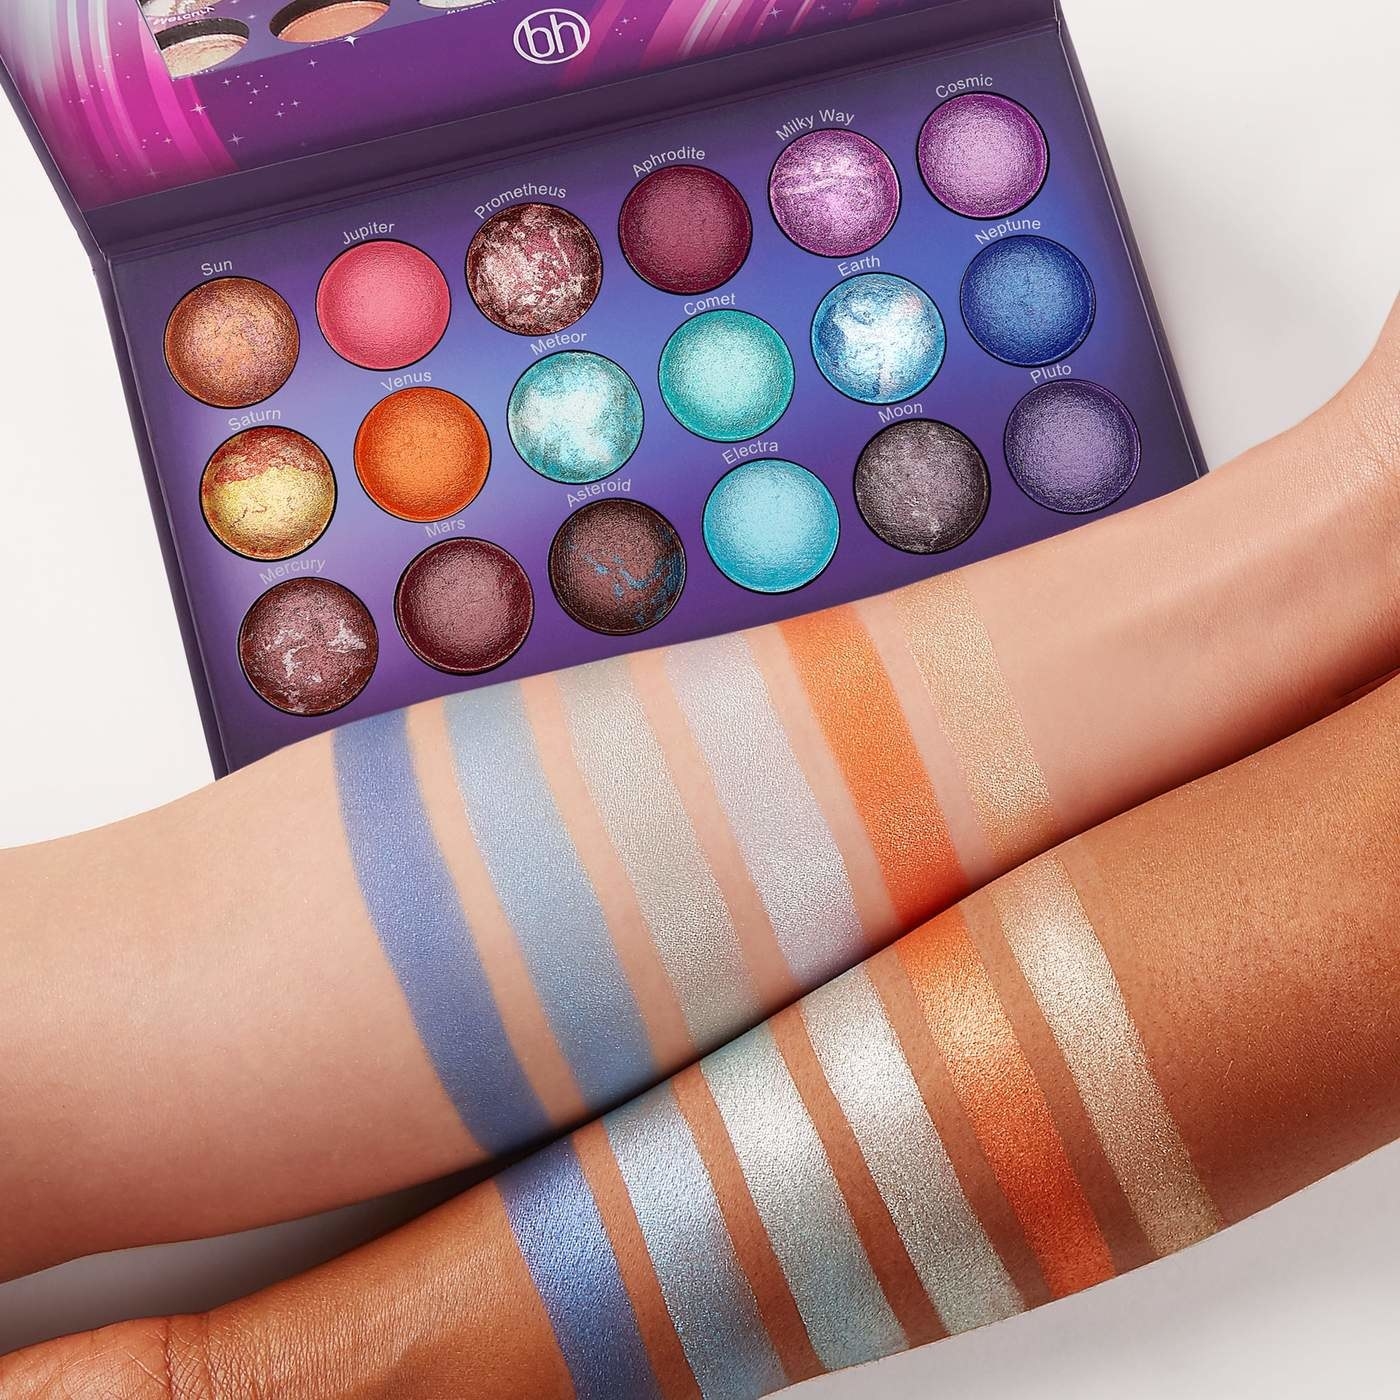 The palette with two different arm swatches to show pigmentation